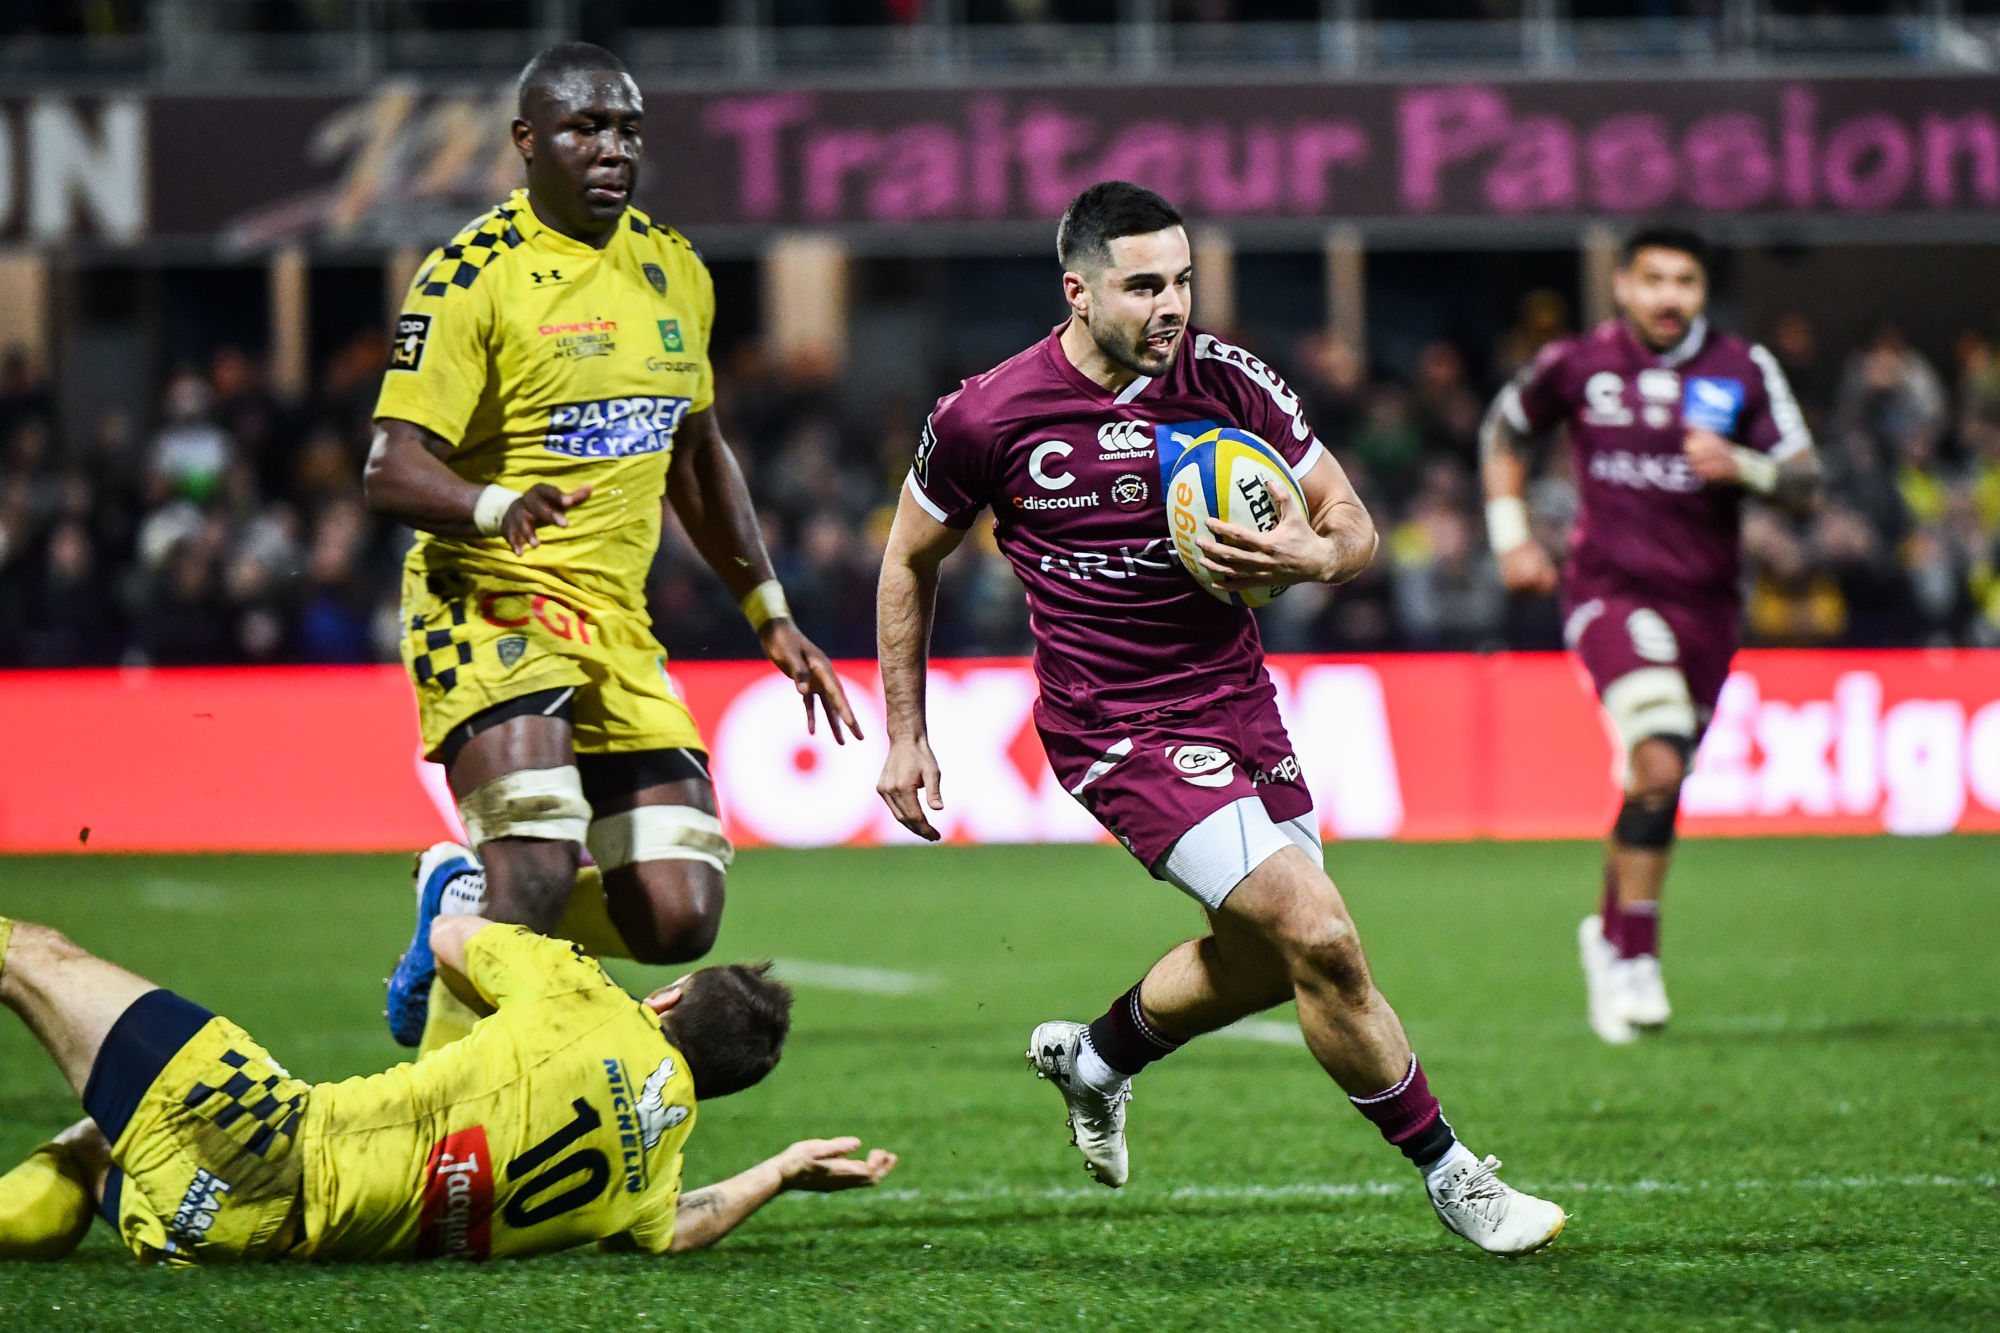 Jules GIMBERT of Bordeaux during the Top 14 match between Clermont and Bordeaux on February 22, 2020 in Clermont-Ferrand, France. (Photo by Anthony Dibon/Icon Sport) - Jules GIMBERT - Stade Marcel Michelin - Clermont Ferrand (France)